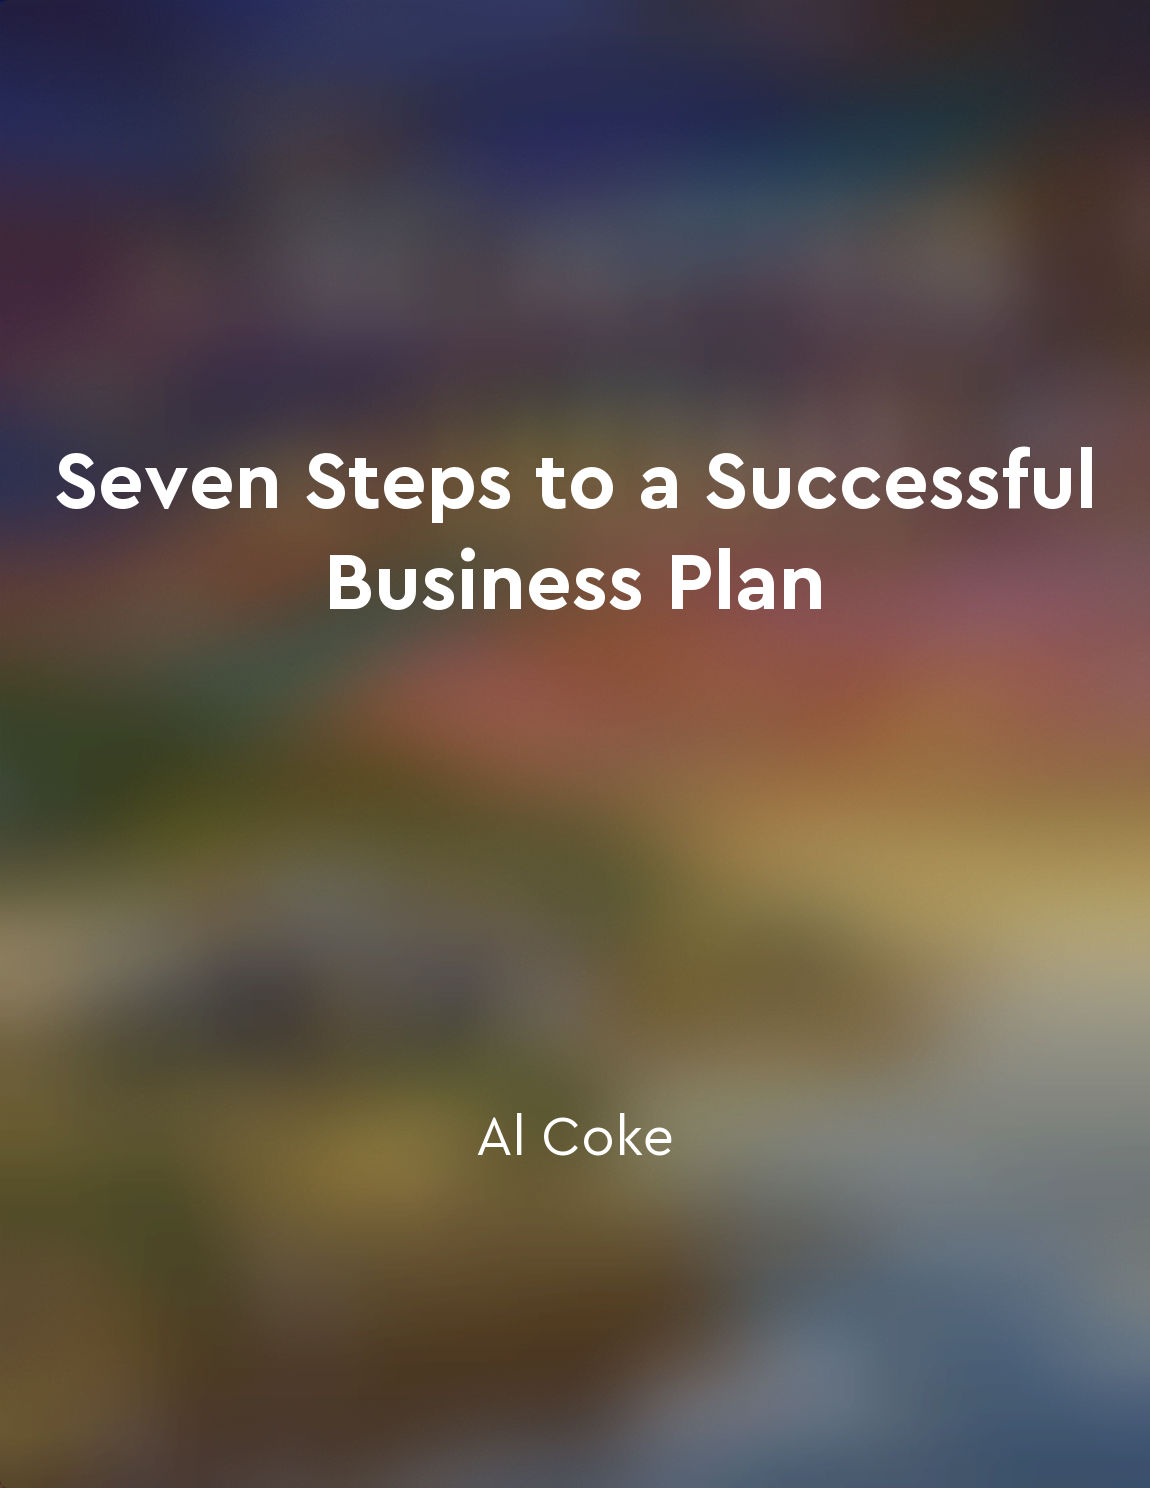 Seven Steps to a Successful Business Plan